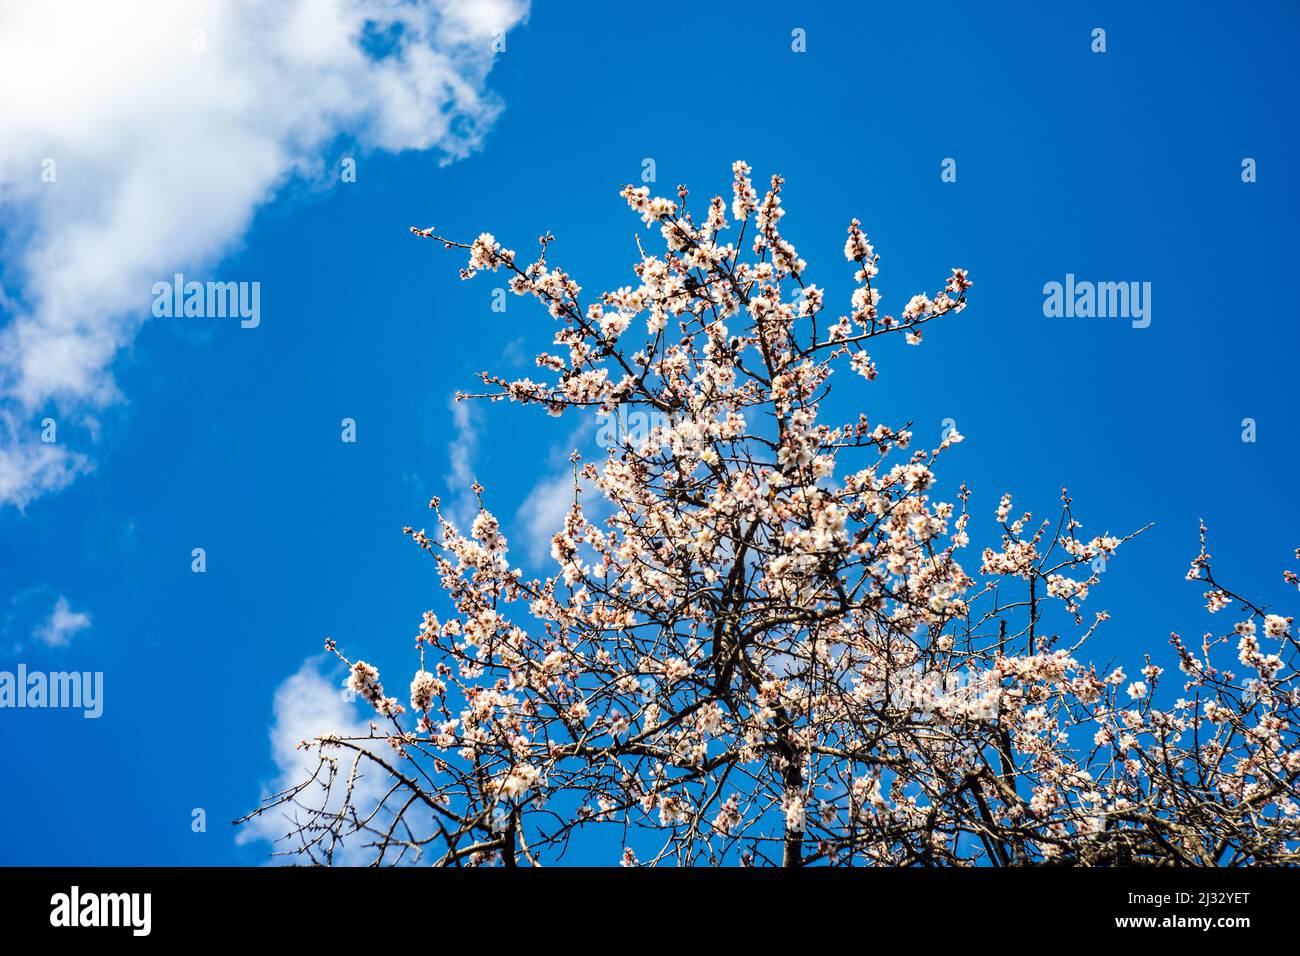 Blooming plum tree on the blue sky background Stock Photo